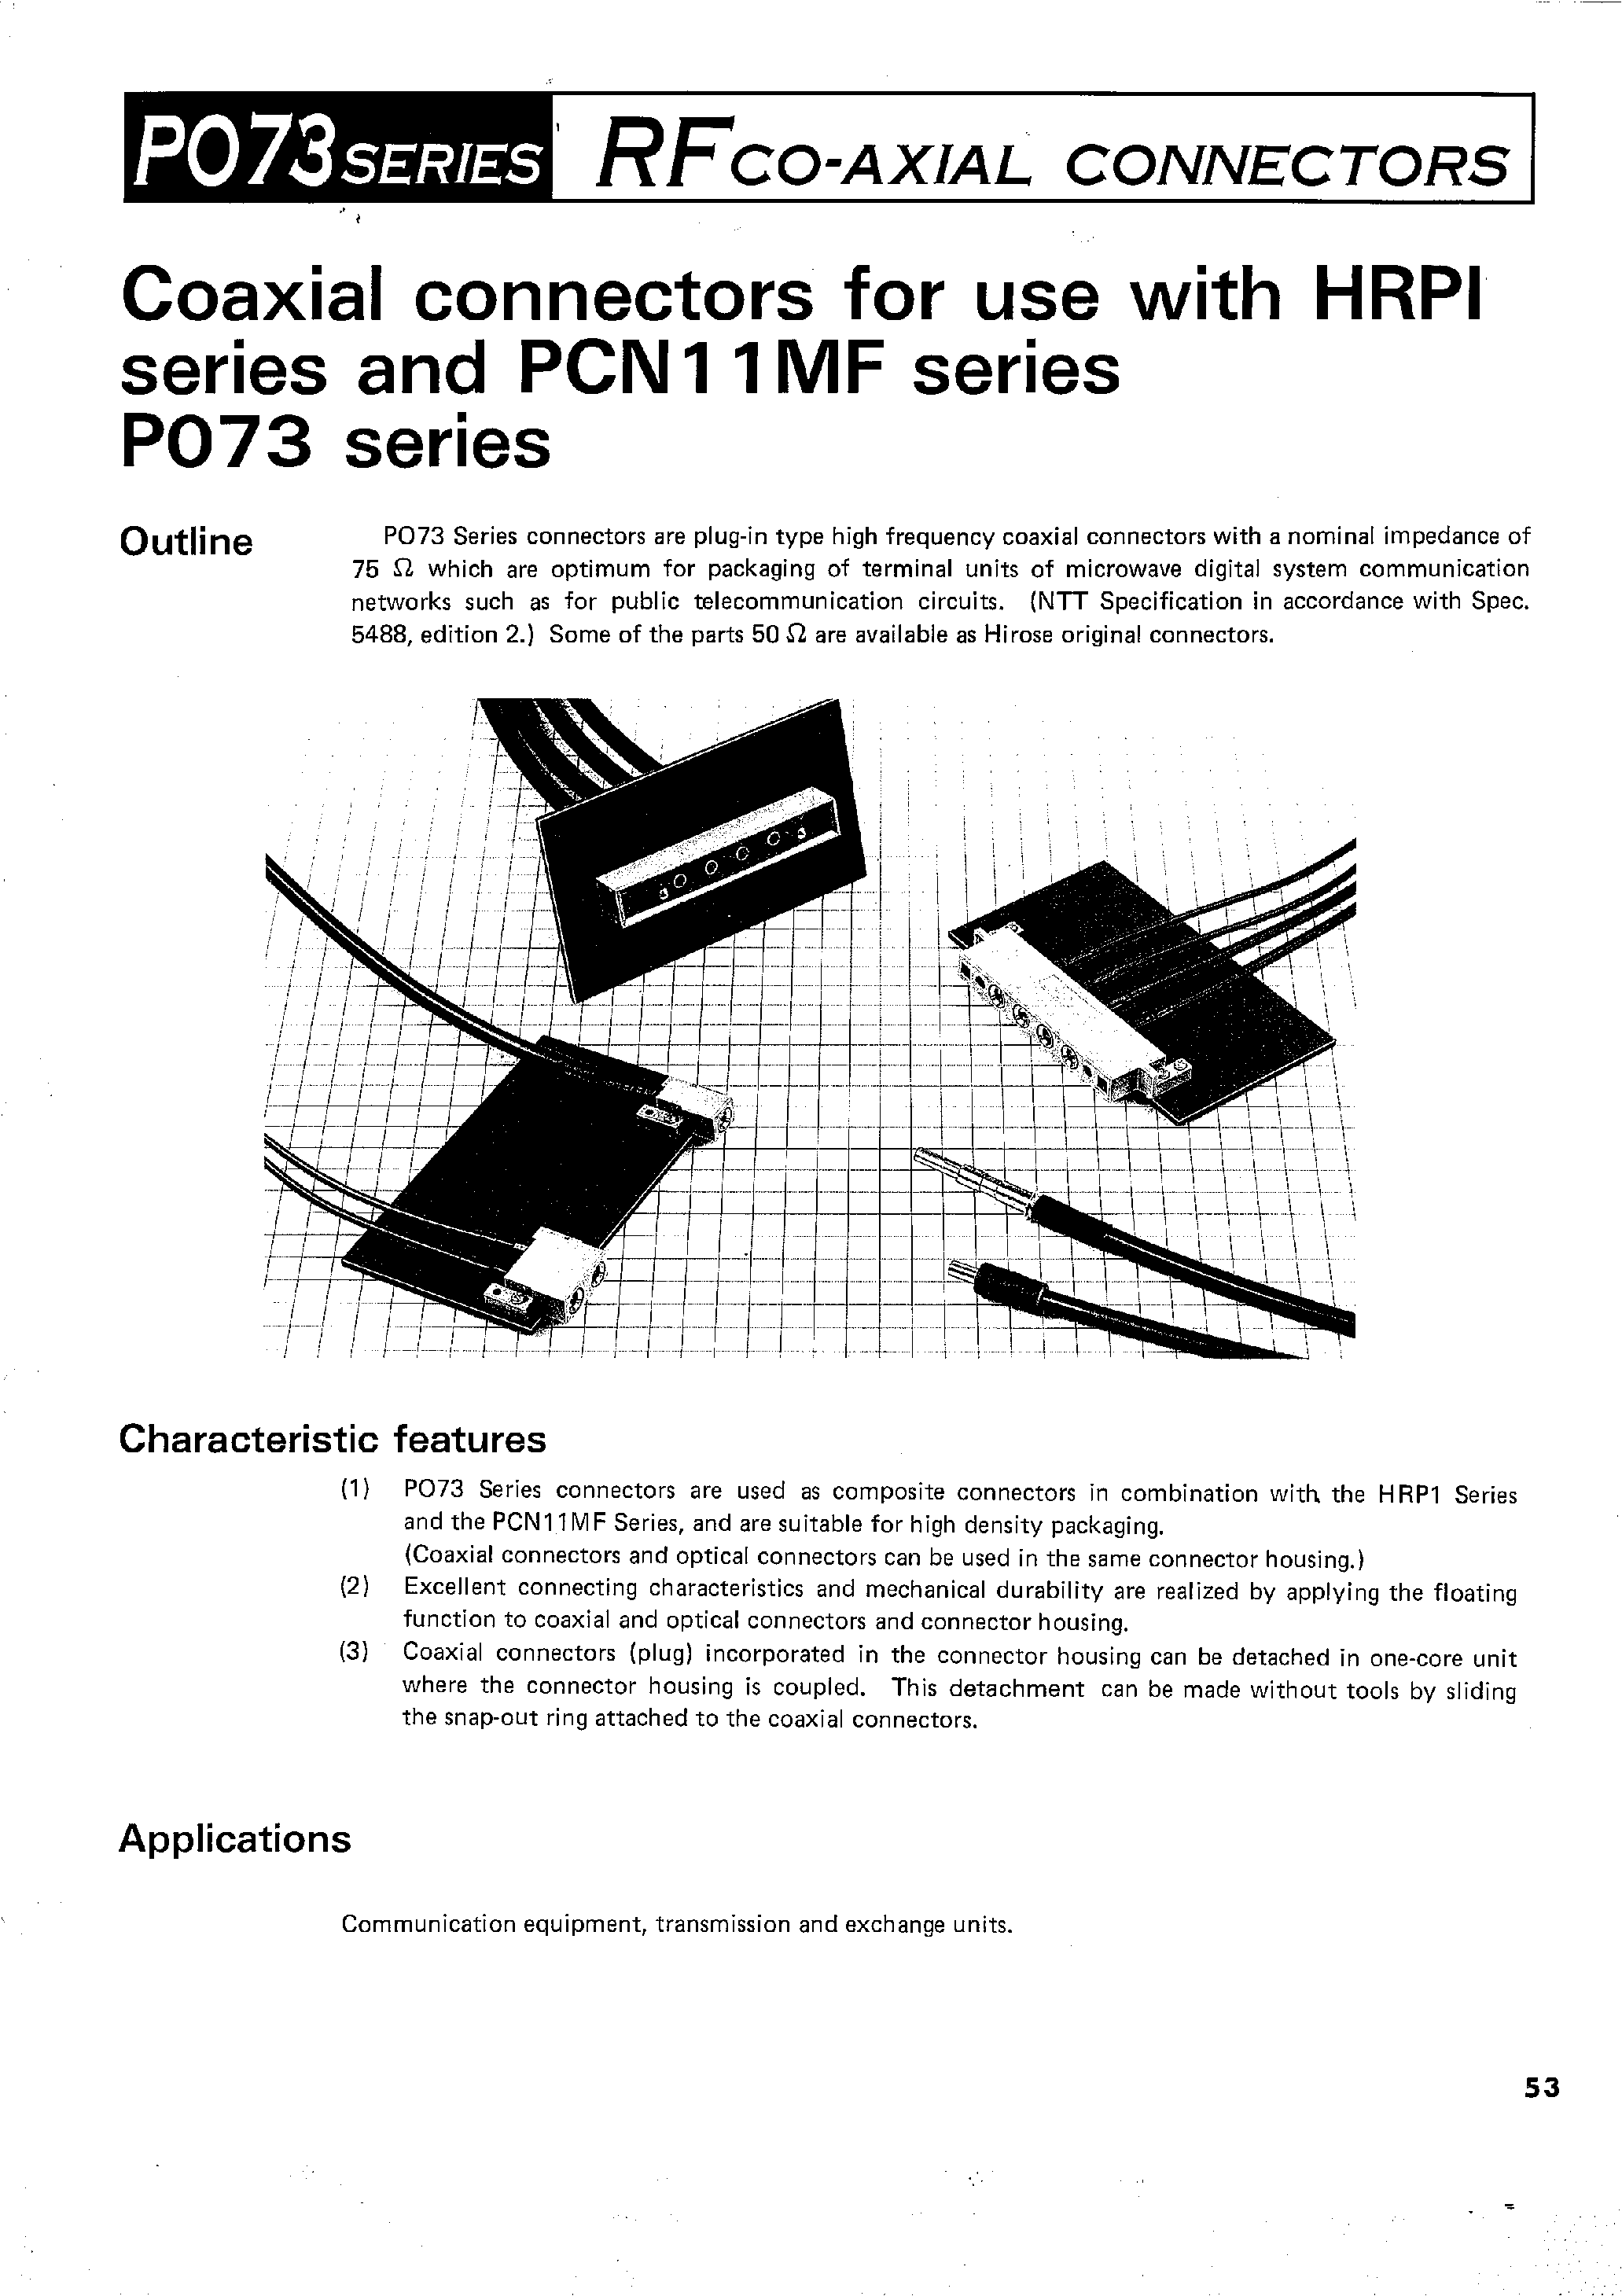 Даташит PO73-P-2.5CV - RFCO-AXIAL CONNECTORS(COAXIAL CONNECTORS for use with HRPI) страница 1